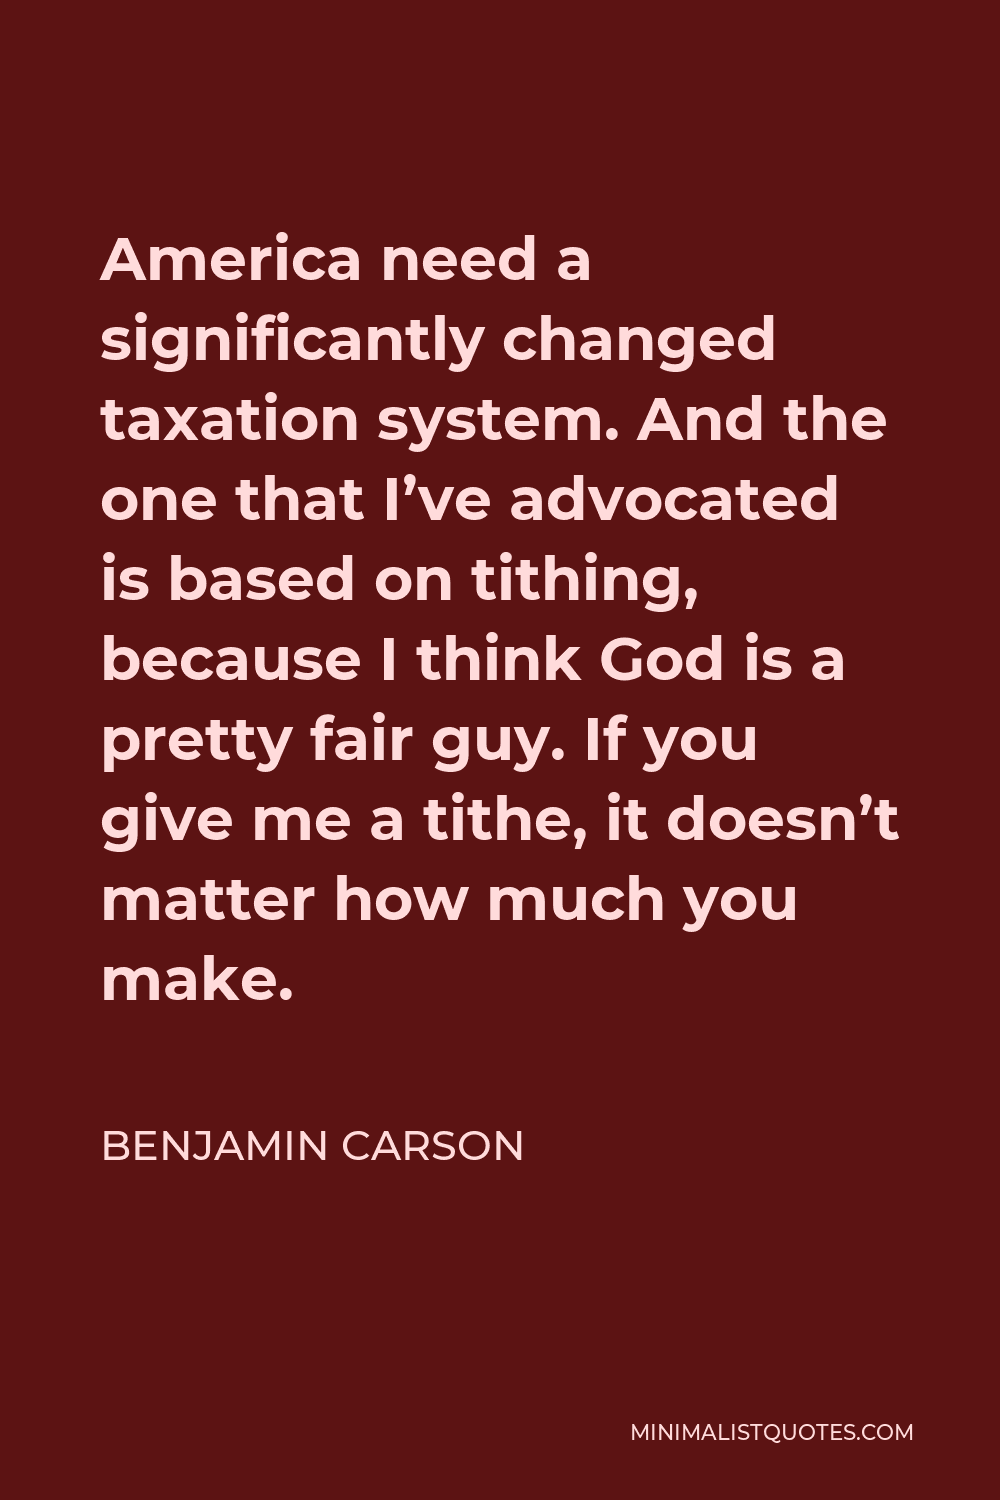 Benjamin Carson Quote - America need a significantly changed taxation system. And the one that I’ve advocated is based on tithing, because I think God is a pretty fair guy. If you give me a tithe, it doesn’t matter how much you make.